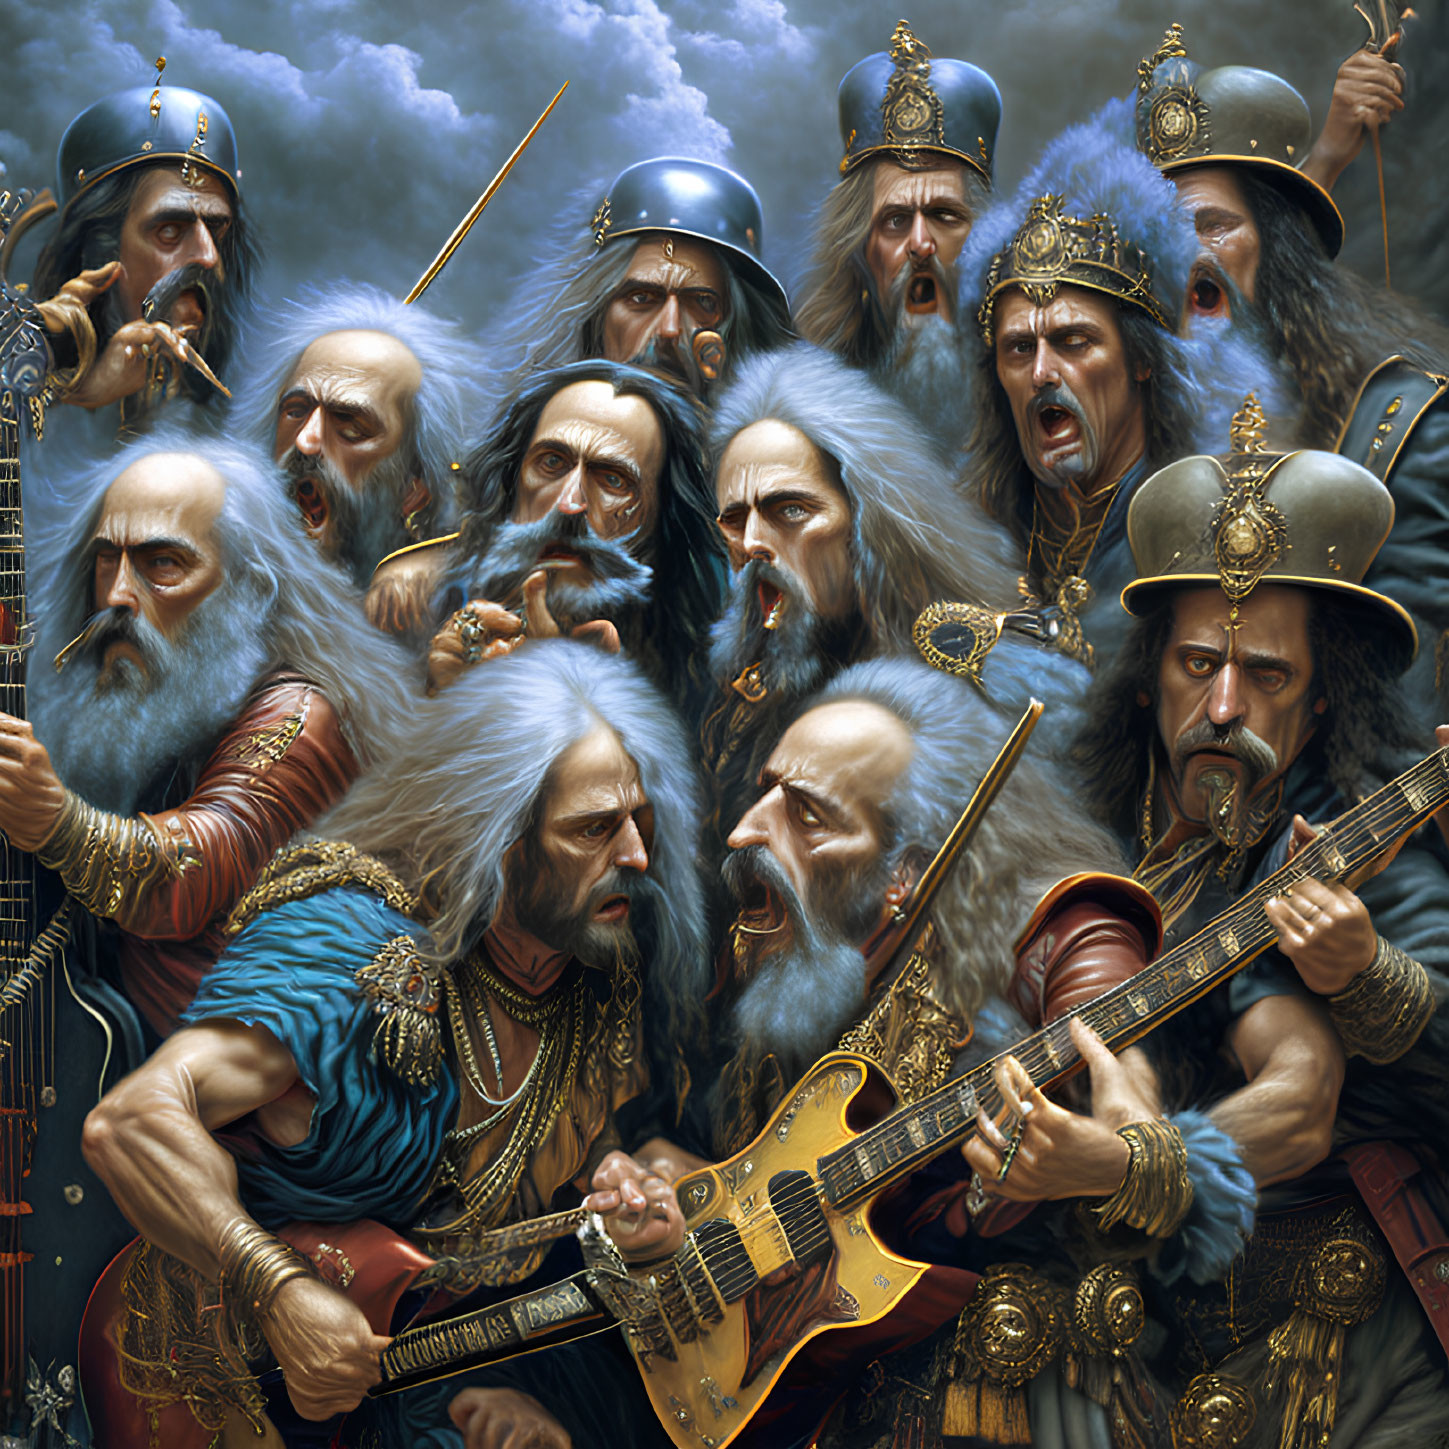 Fantastical painting of medieval warriors and wizards with electric guitars